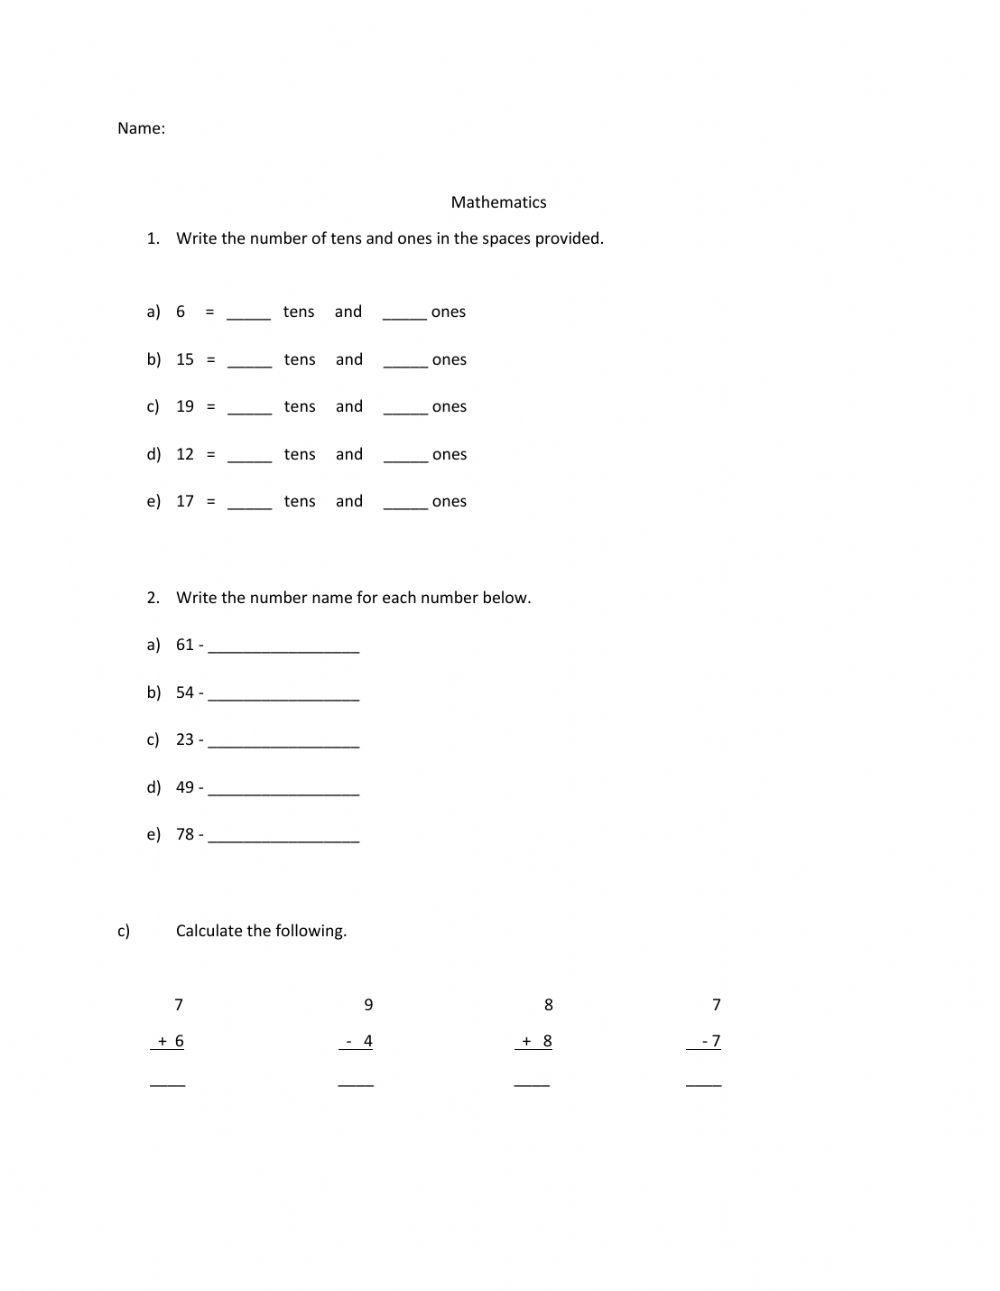 Worksheet (Number Names, Tens and Ones, Calculations)